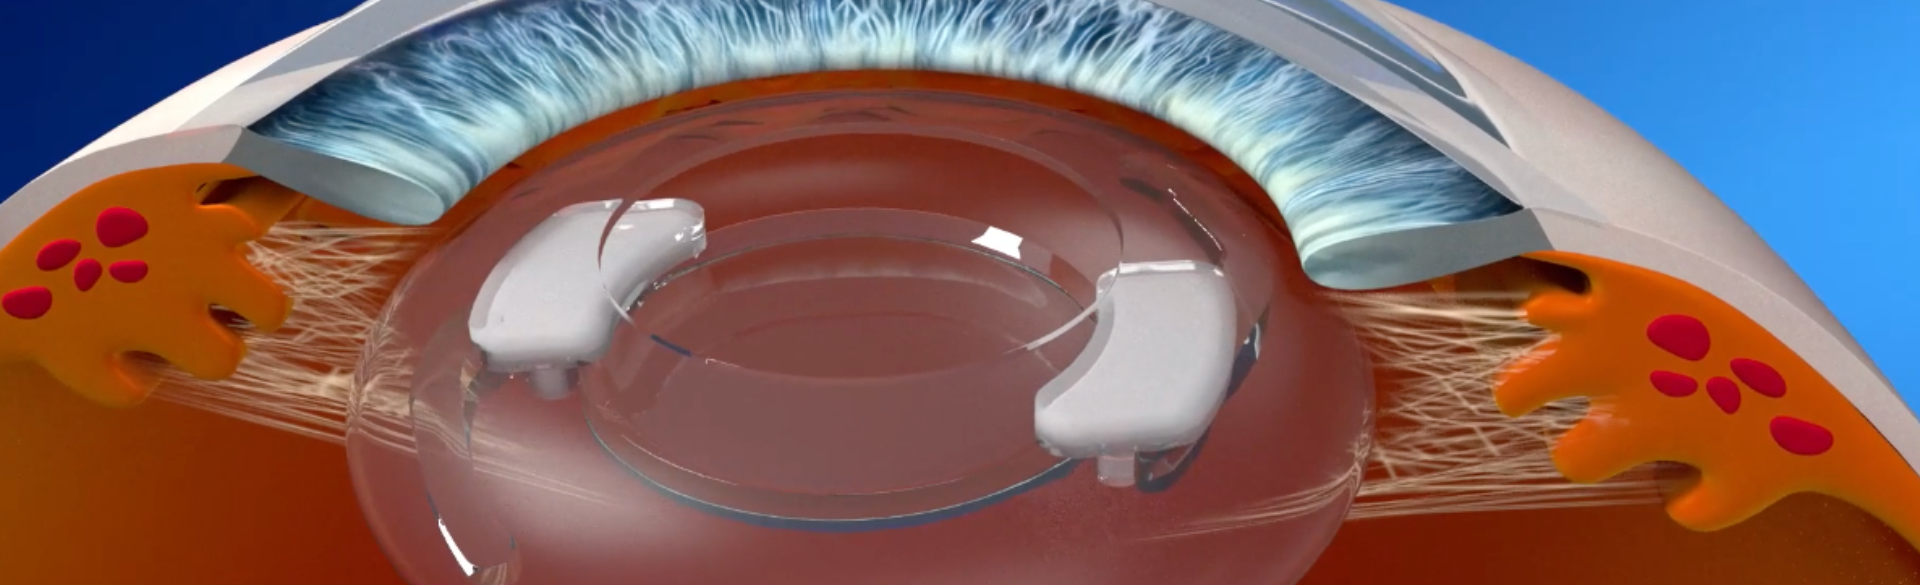 Drug Delivery Platform Developed by CU Ophthalmologist Shows Promise for Glaucoma Patients